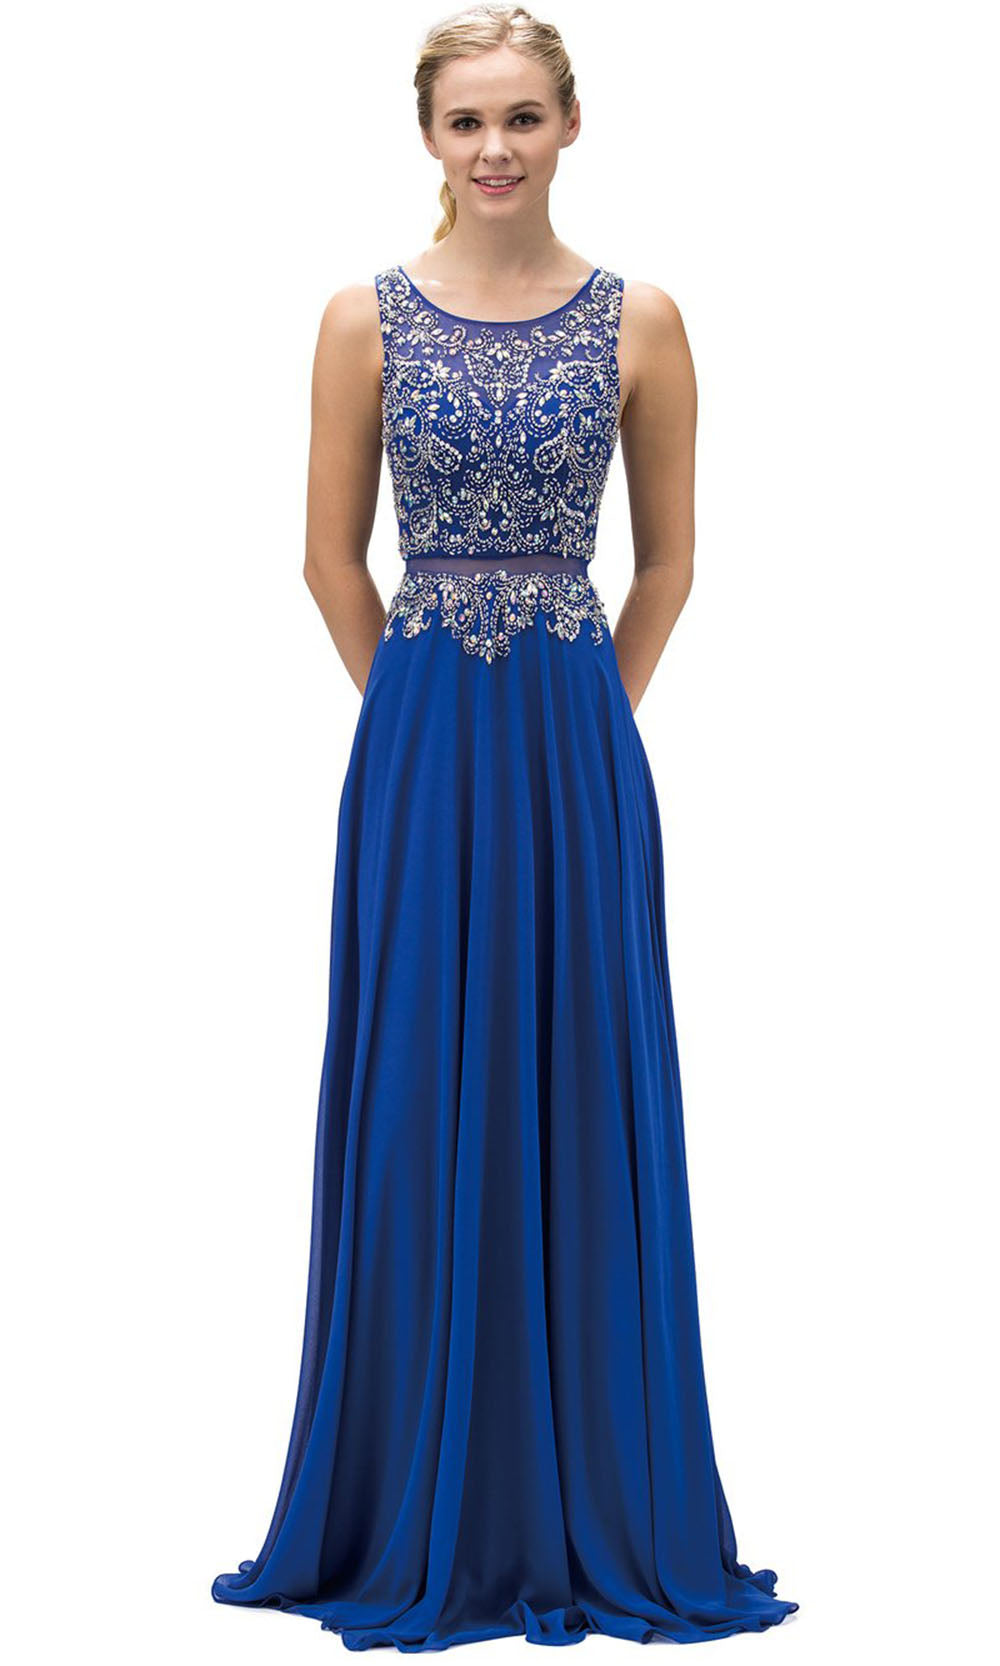 Dancing Queen - 9150 Illusion Two-Piece Beaded Bodice A-Line Gown In Blue